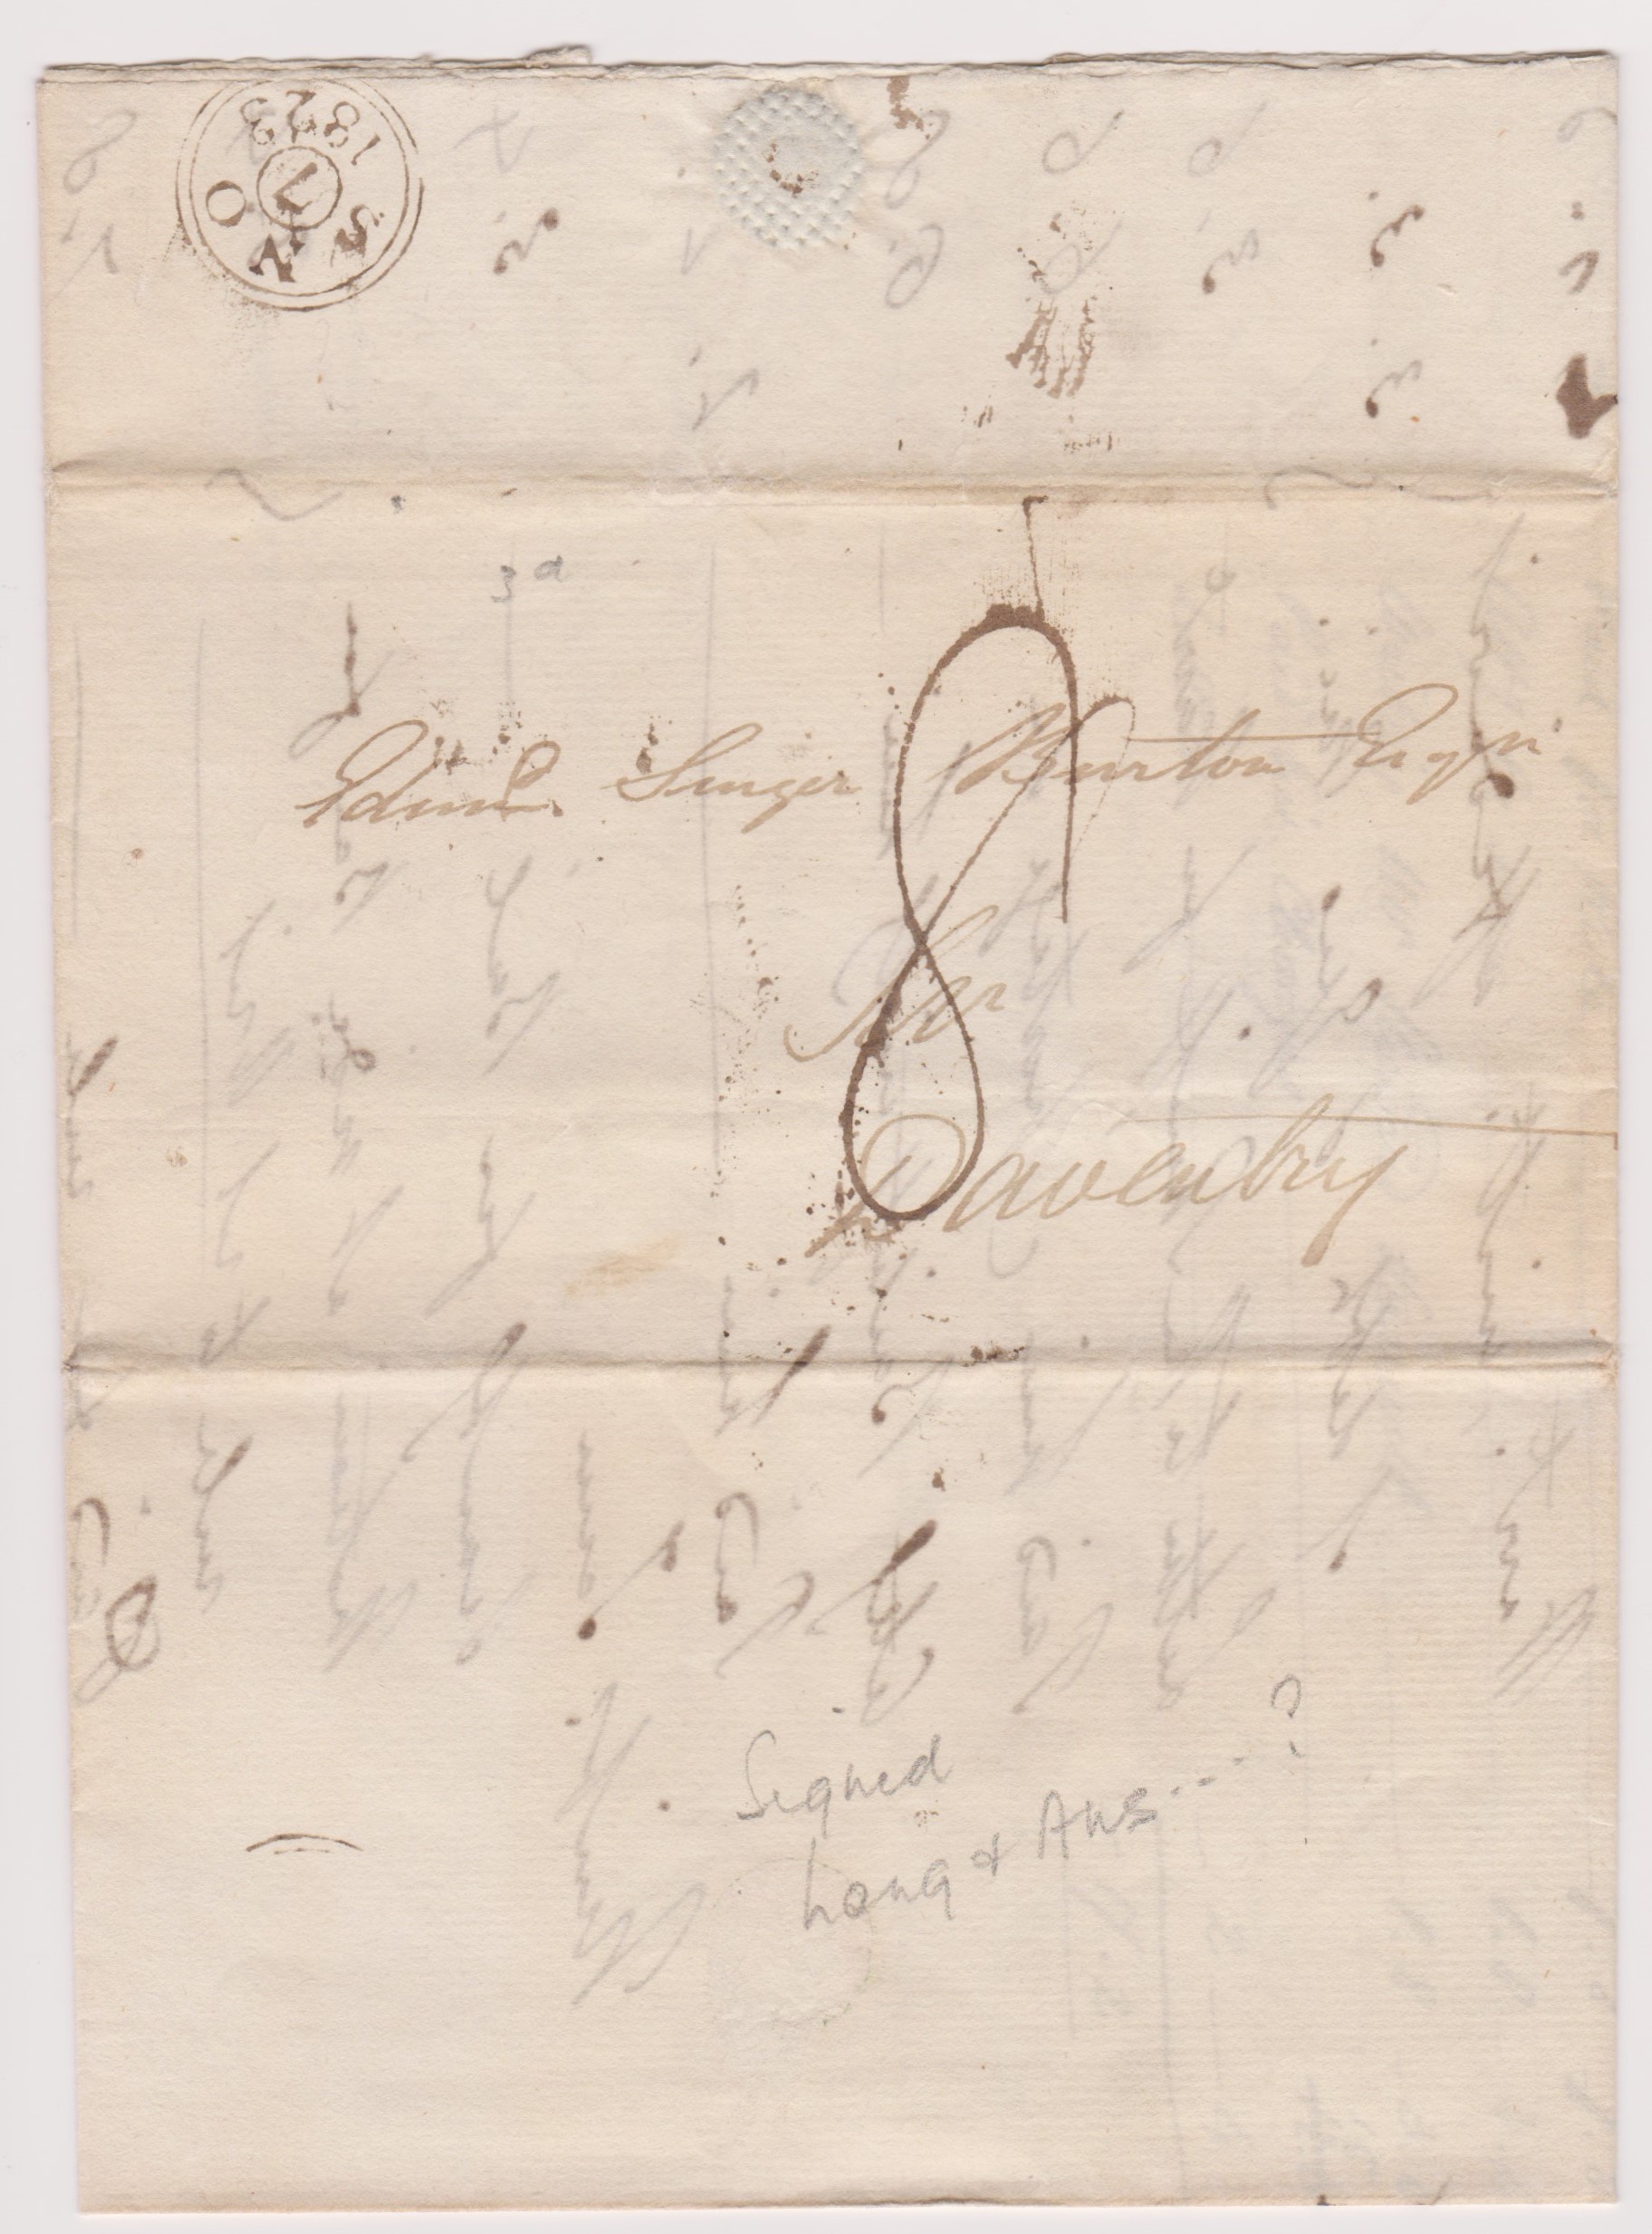 Great Britain 1823 - Postal History EL Dated 7th Nov 1823 Gray's Inn posted to Daventry-manuscript